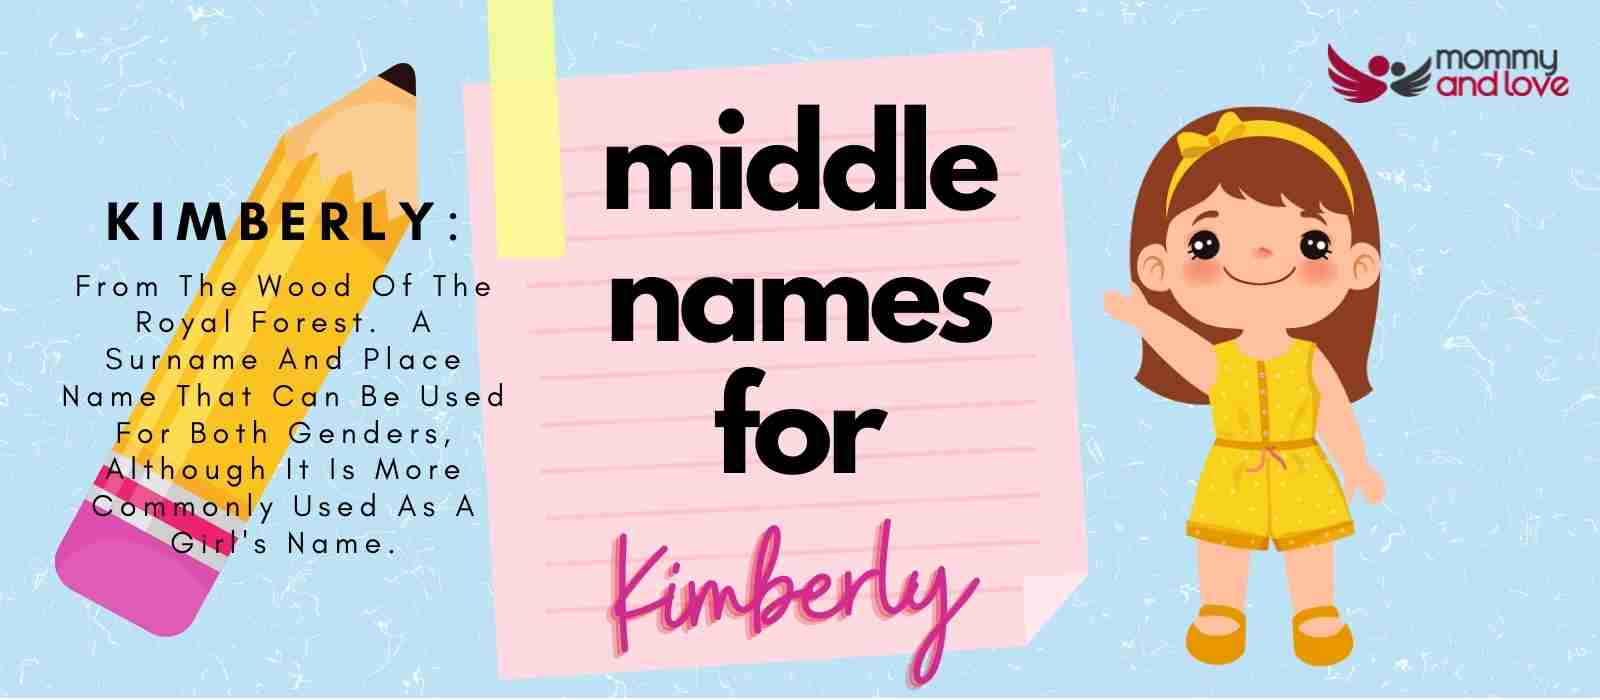 Middle Names for Kimberly